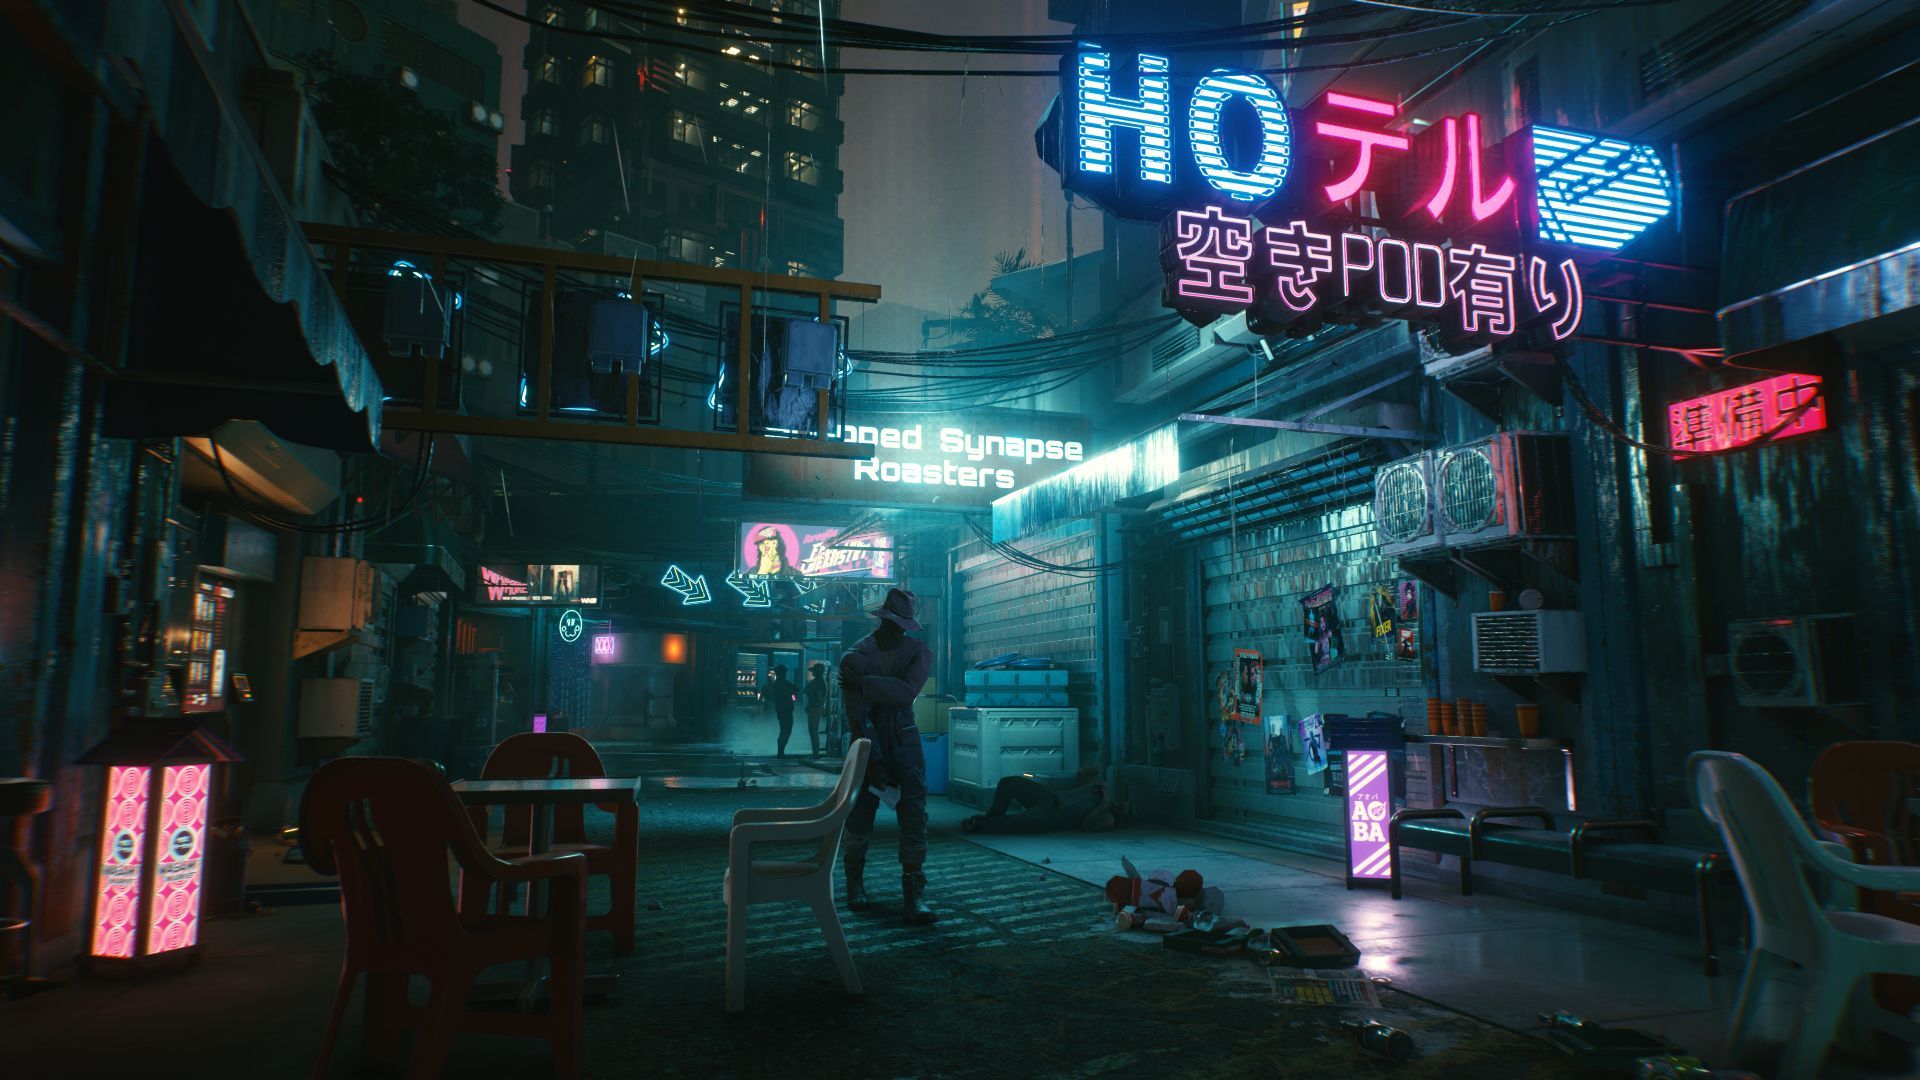 Cyberpunk 2077 Pre Orders In China Reportedly “top The World”